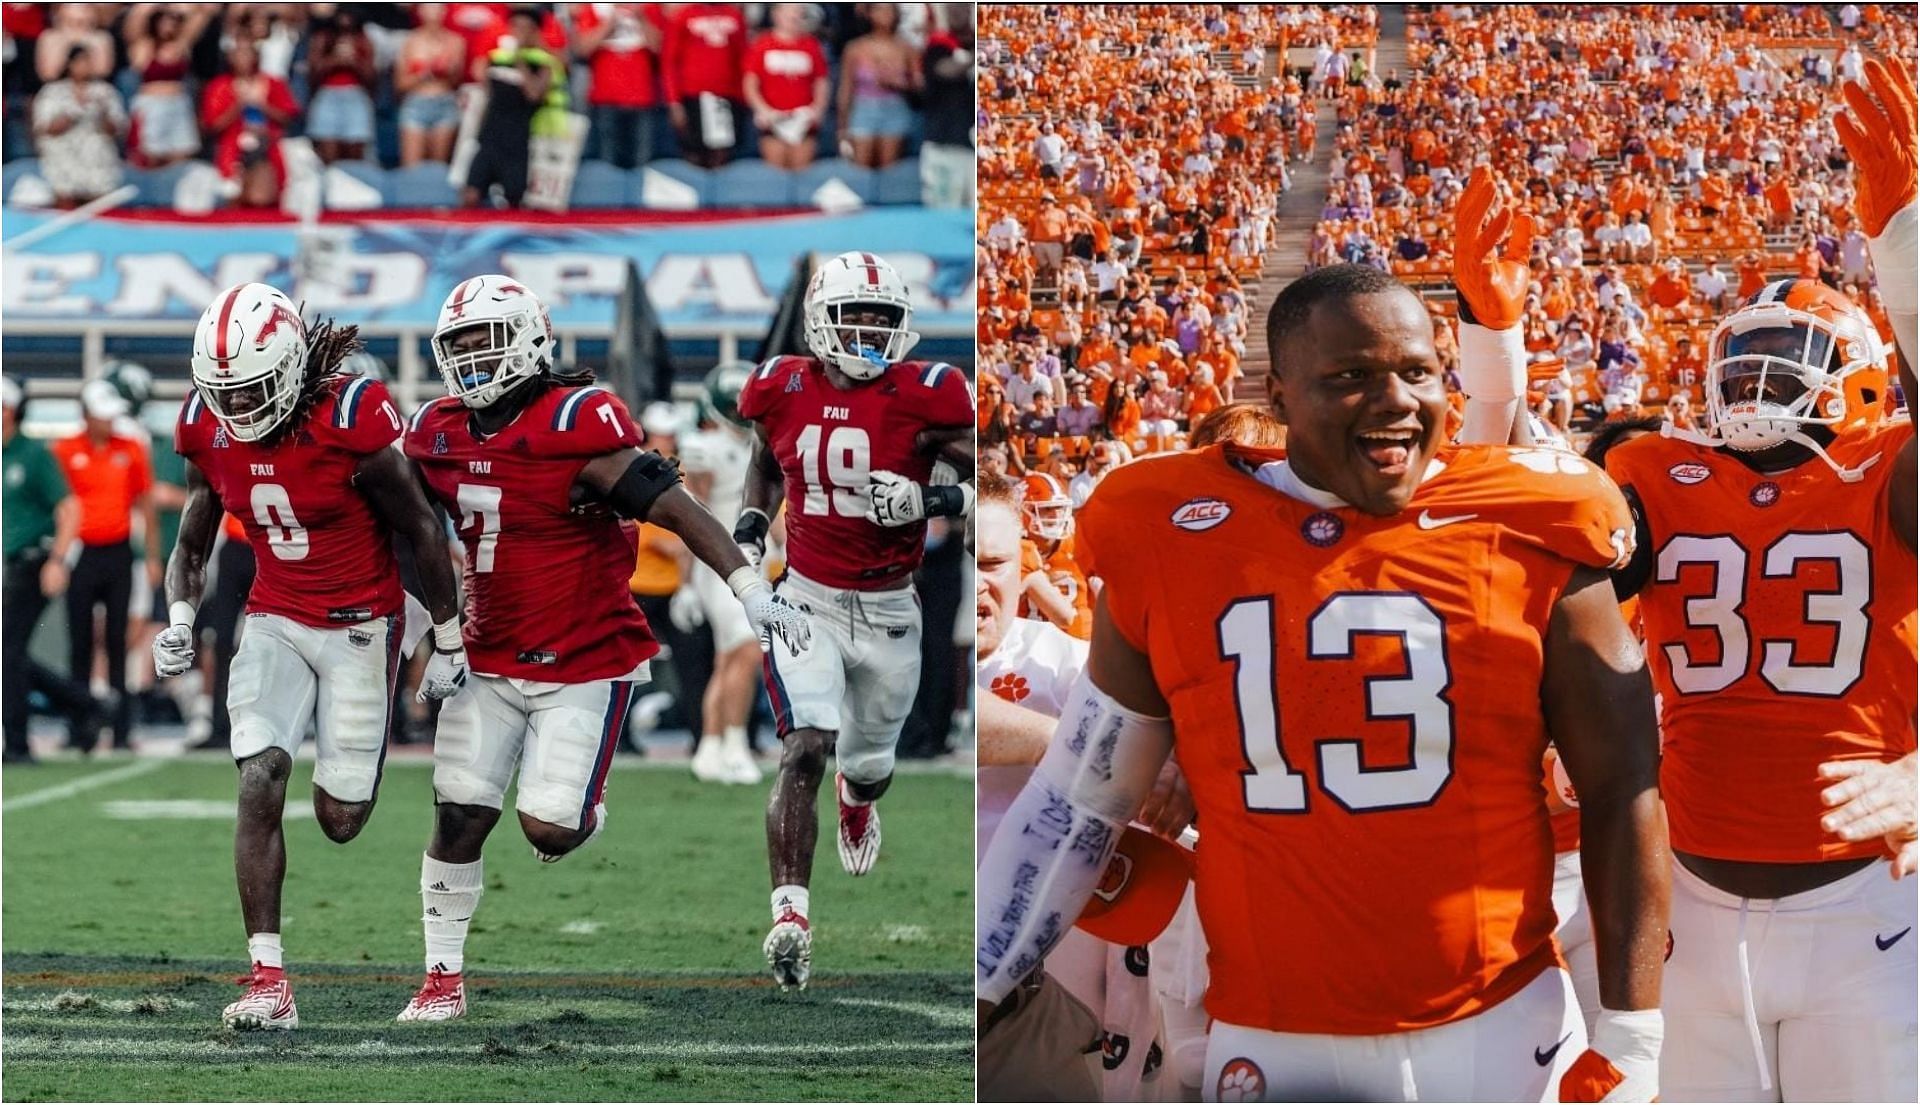 The Florida Atlantic Owls clash with the Clemson Tigers in week 3